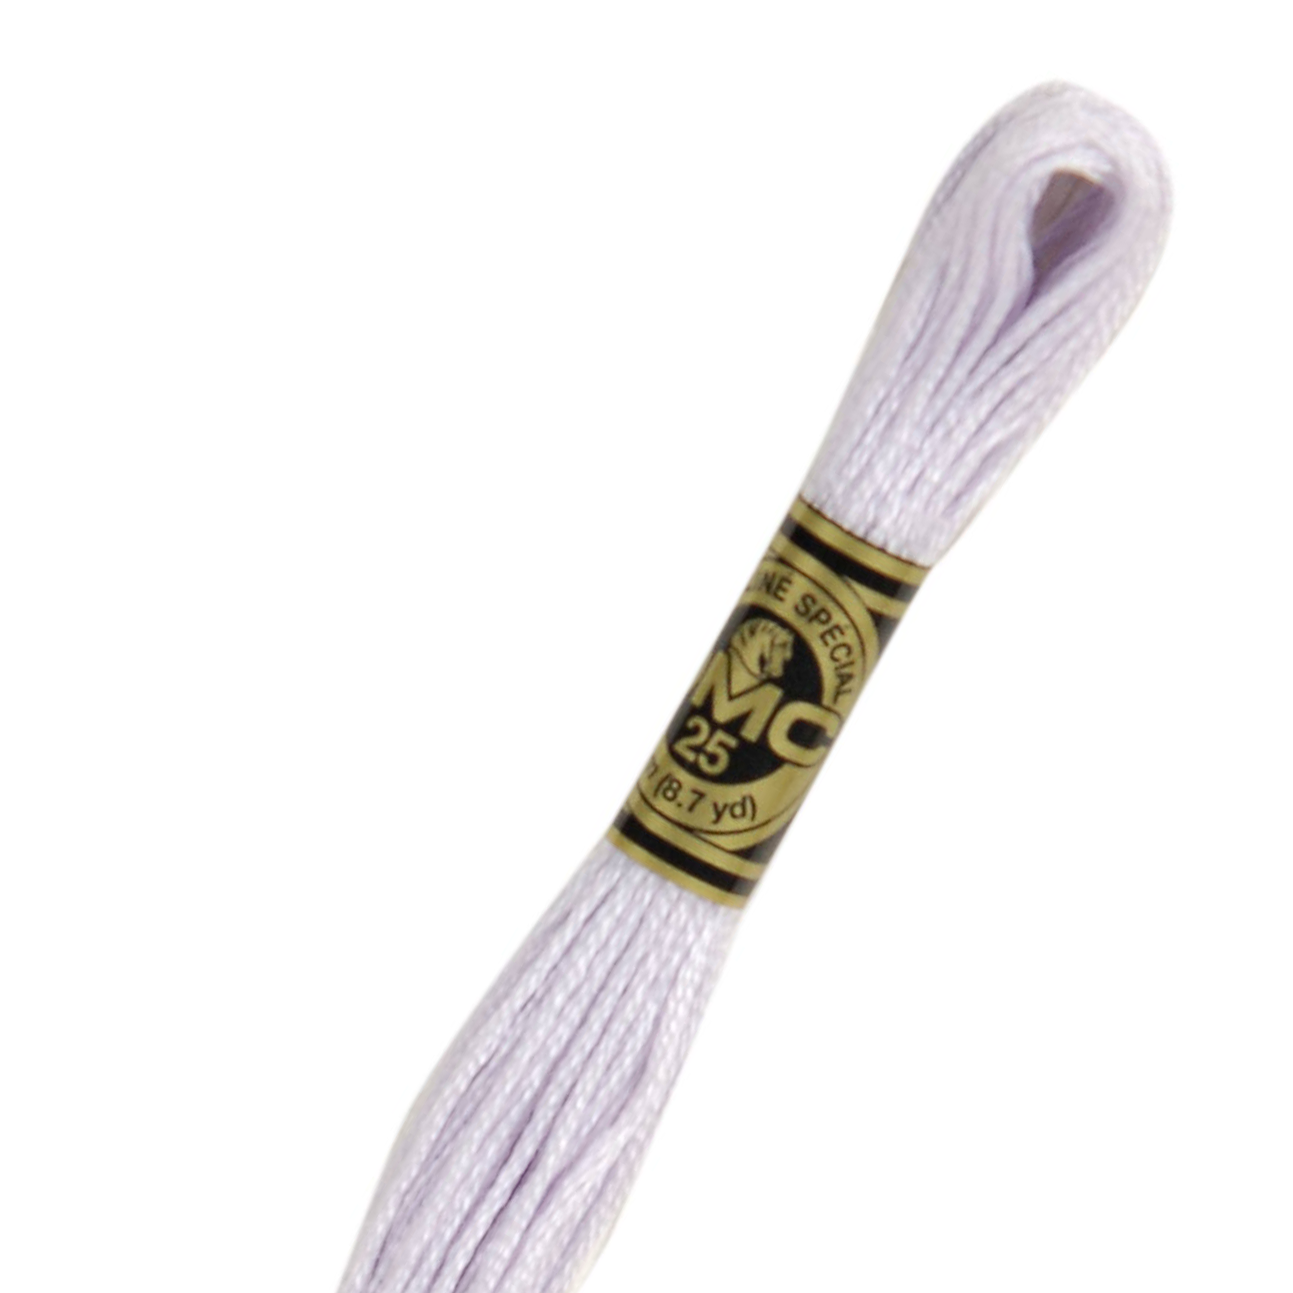 DMC Embroidery Cotton Floss, White, 8.7 yd